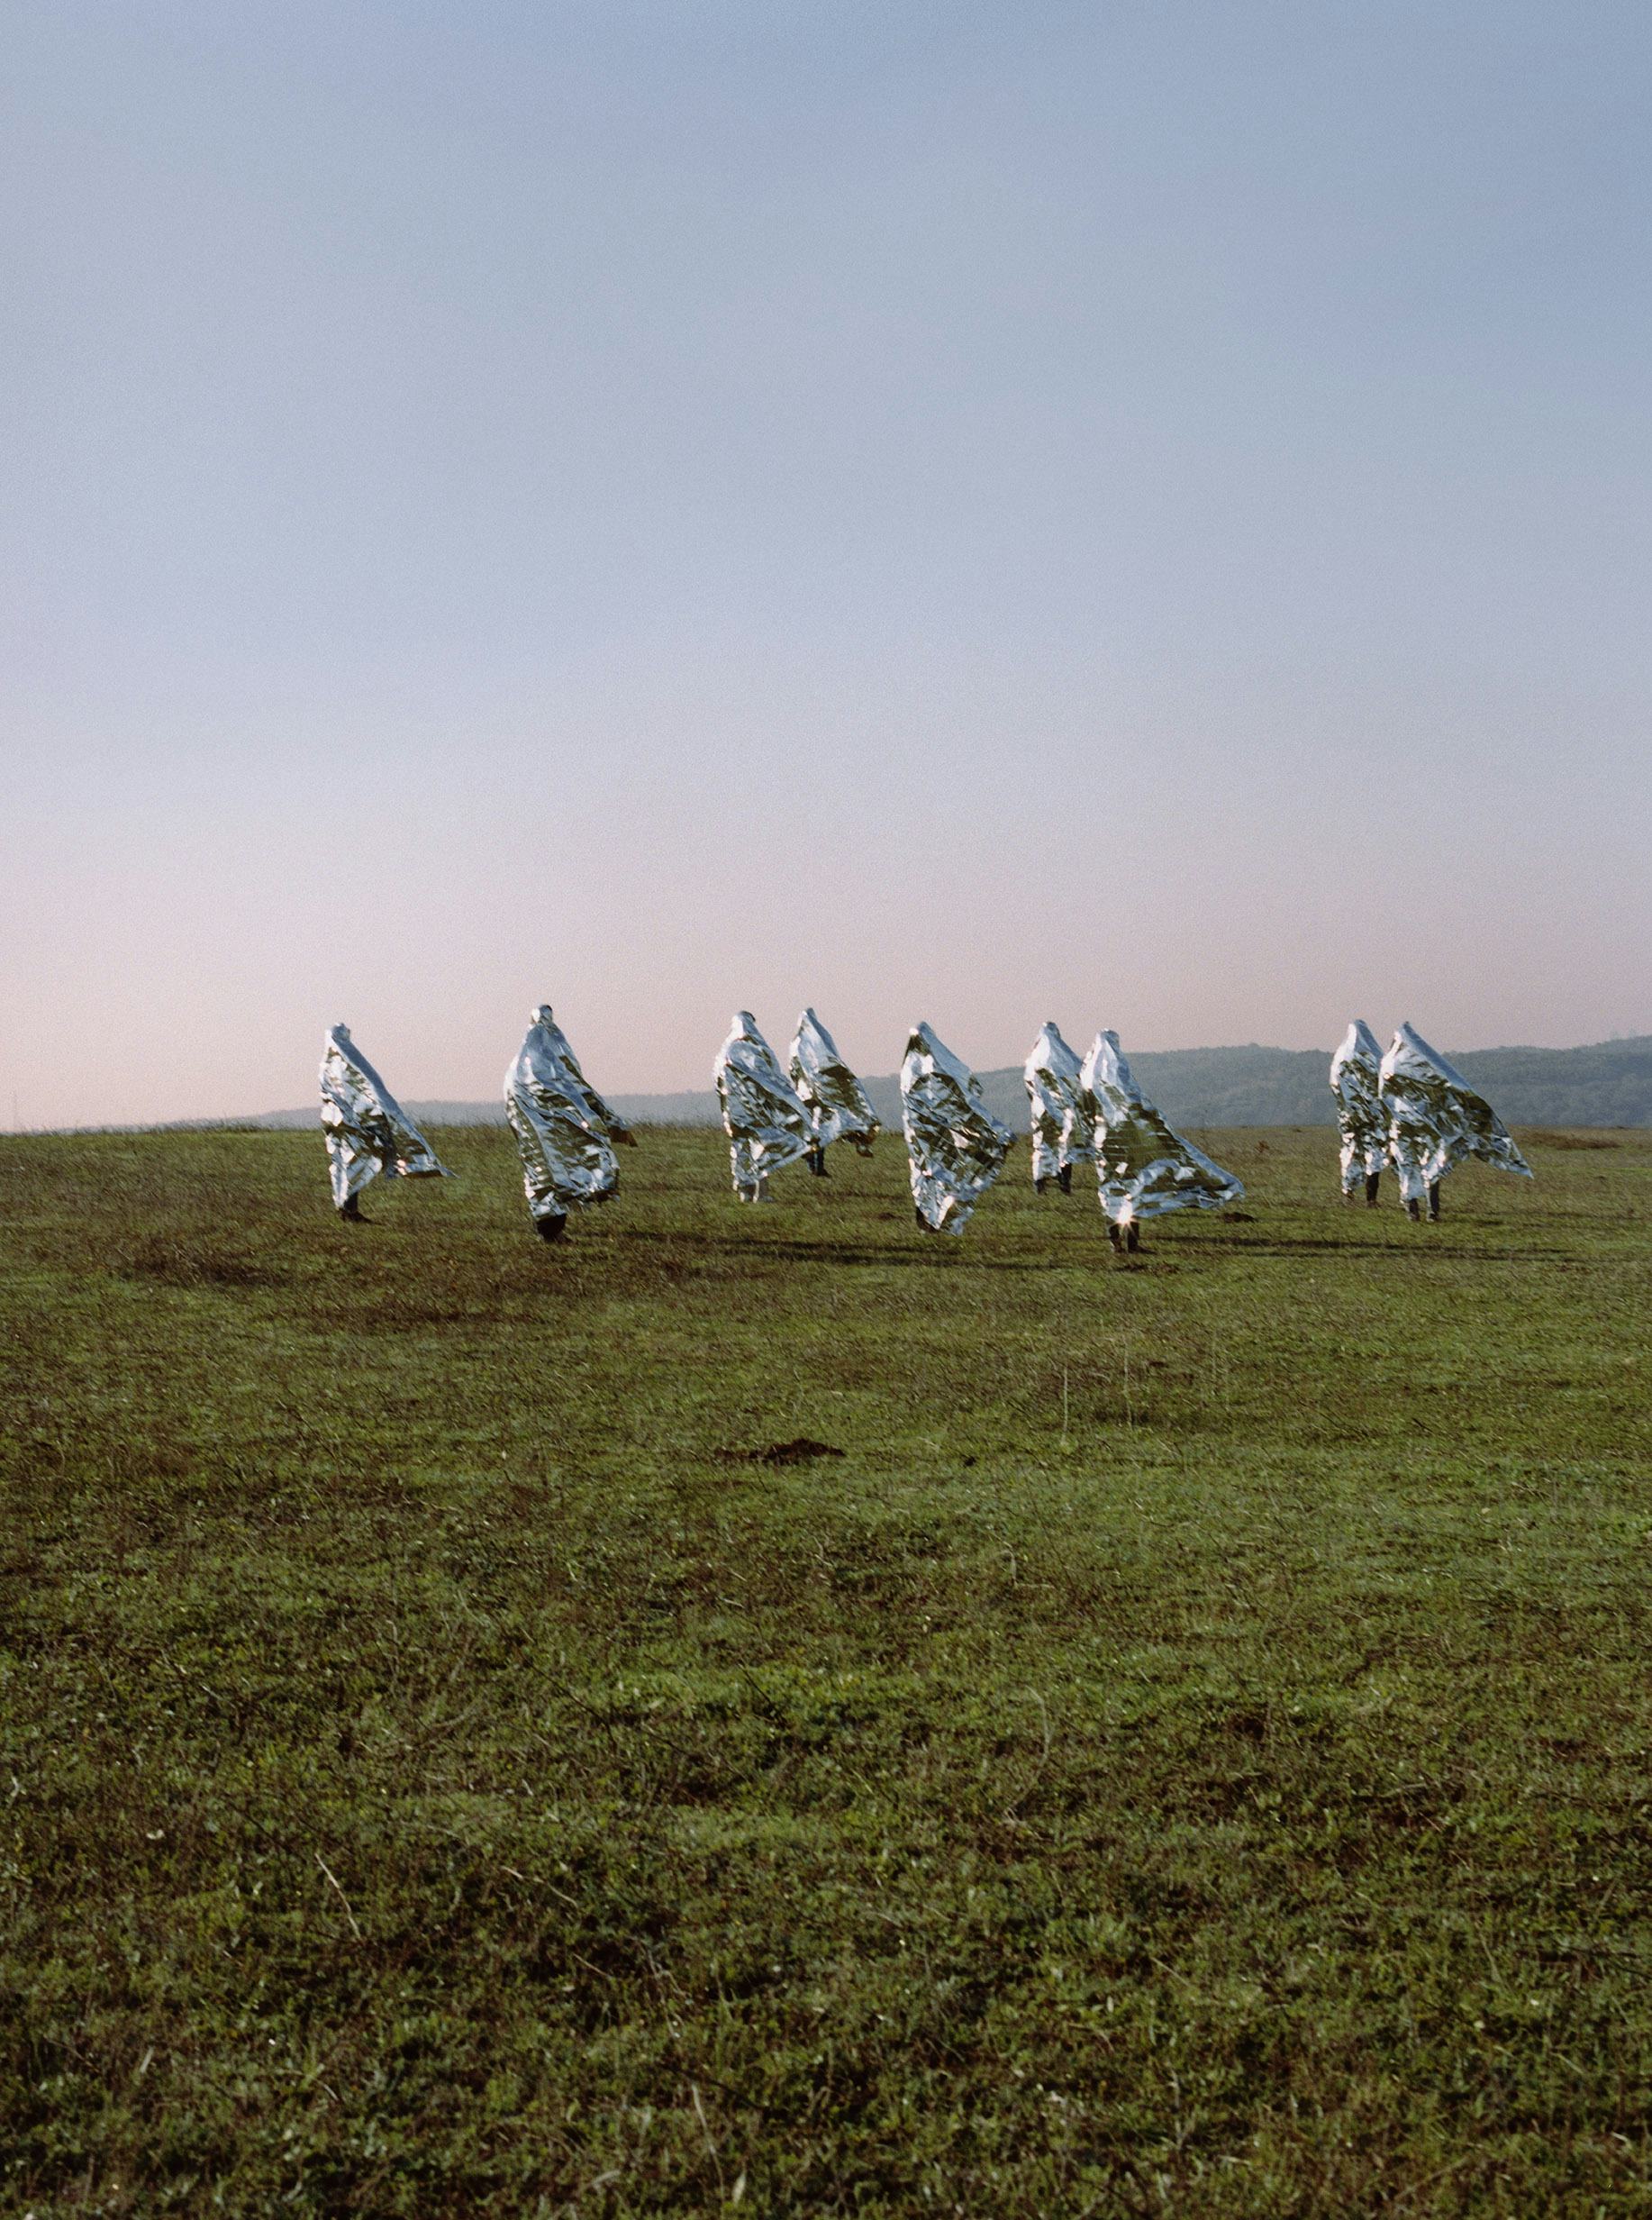 group of people standing in field with pink sky and metallic covers